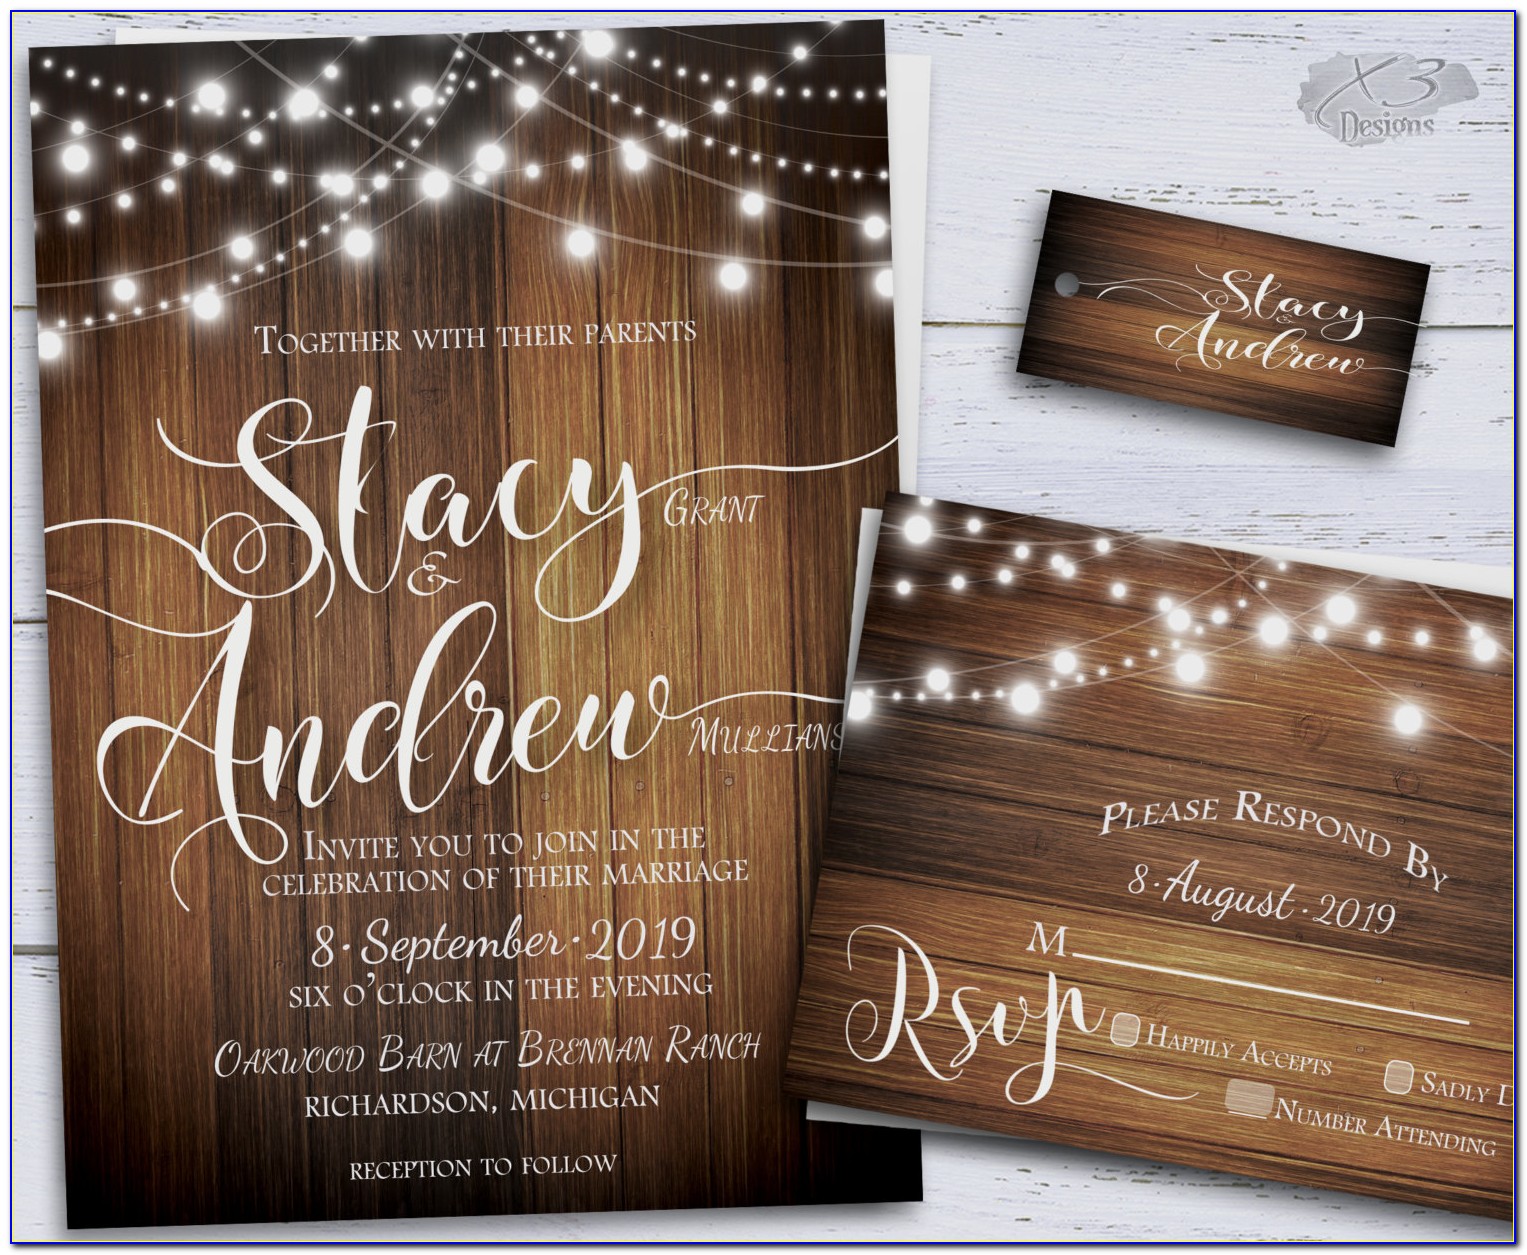 Rustic Wedding Invitations And Save The Dates